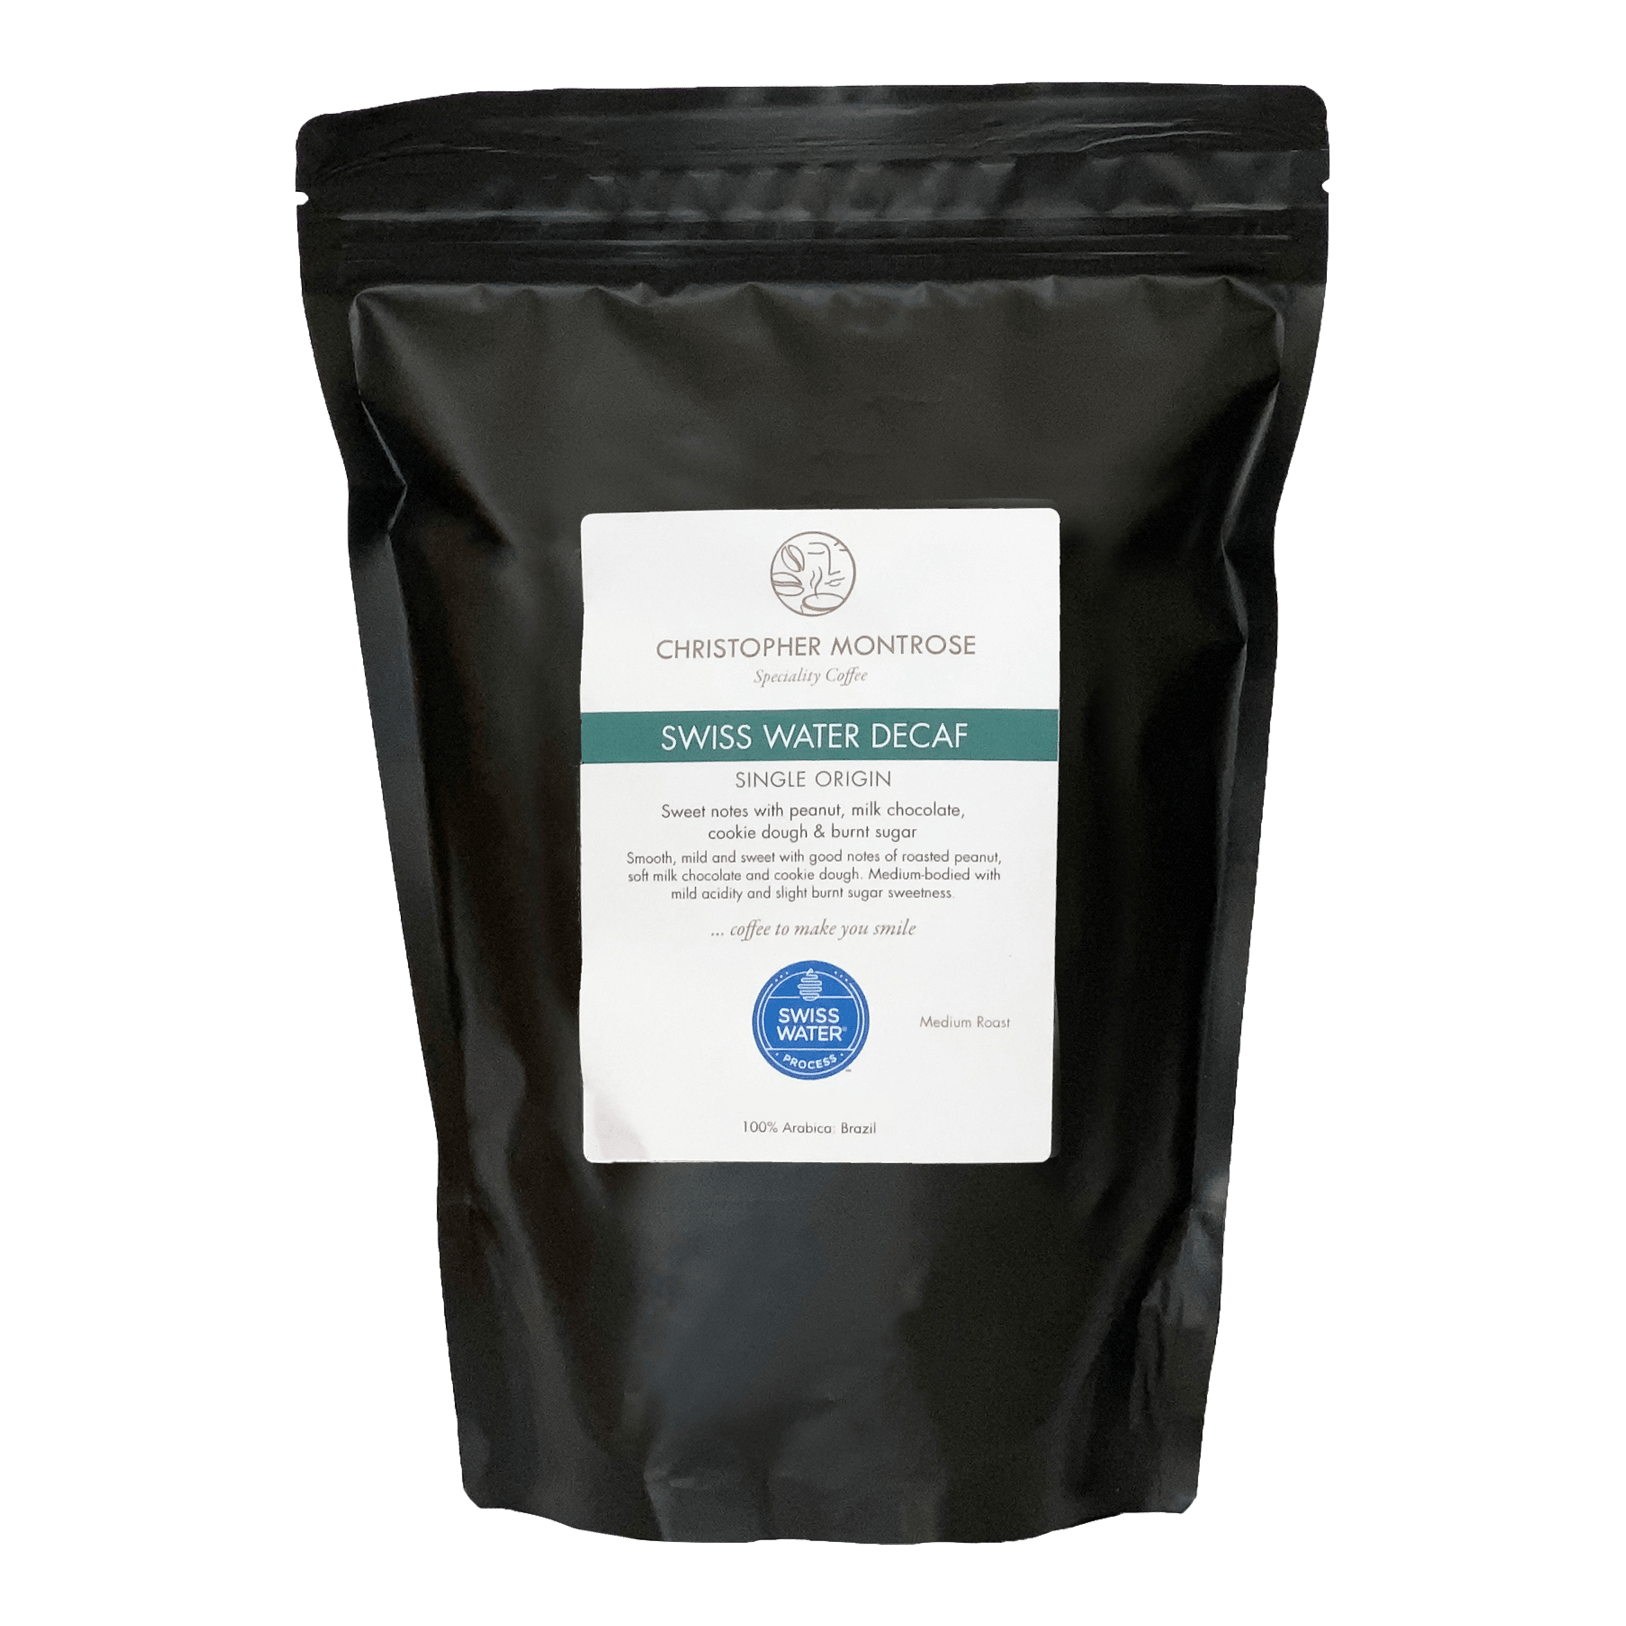 Christopher Montrose Swiss Water Decaf Coffee